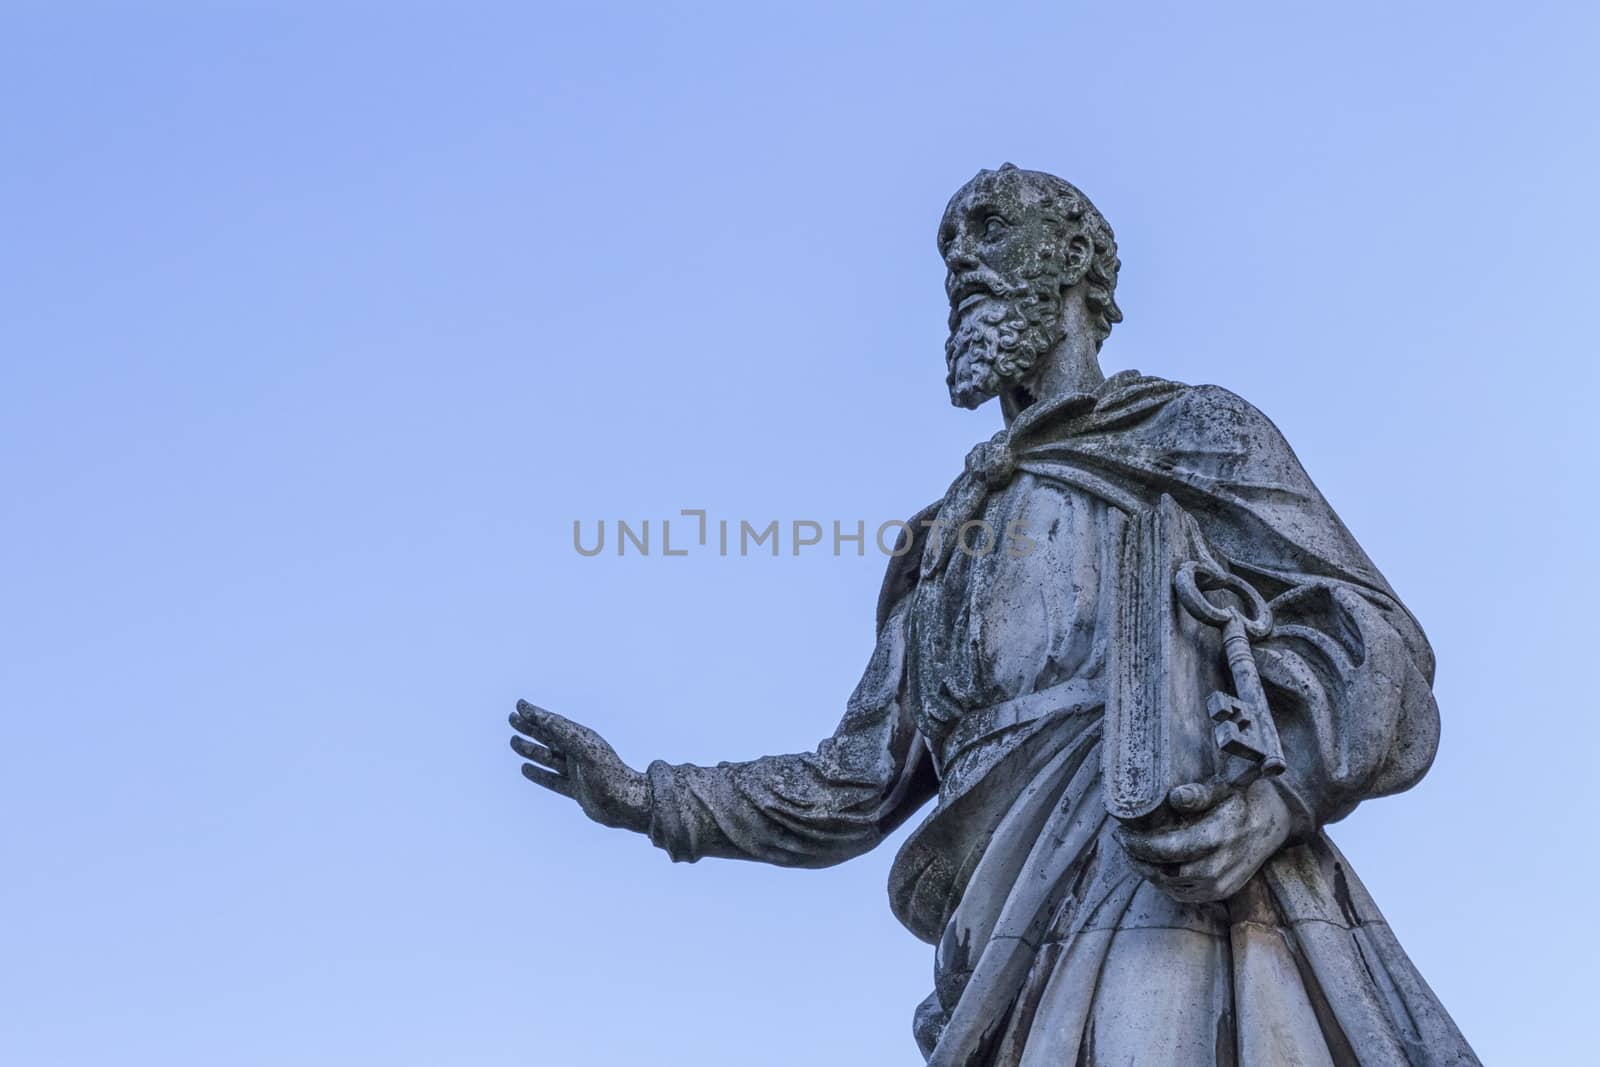 St. Peter statue in front of the Basilica in Eger, Hungary by Elenaphotos21